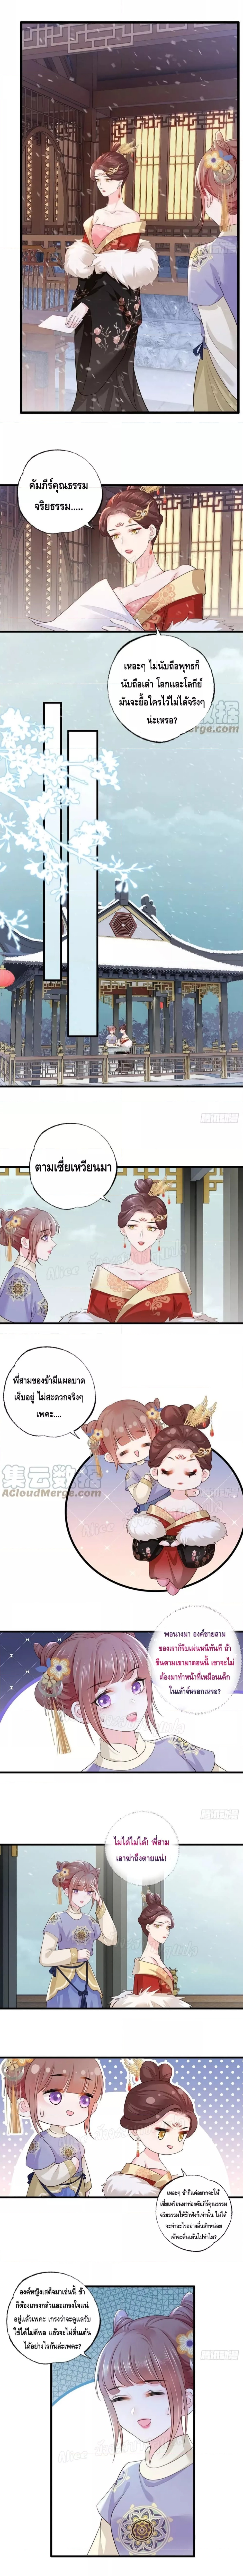 The Pampered Regent of The Richest Woman à¸à¸²à¸£à¸à¸¥à¸±à¸šà¸¡à¸²à¸‚à¸­à¸‡à¸„à¸¸à¸“à¸«à¸™à¸¹à¸œà¸¹à¹‰à¸£à¹ˆà¸³à¸£à¸§à¸¢à¸—à¸µà¹ˆà¸ªà¸¸à¸” à¸•à¸­à¸™à¸—à¸µà¹ˆ 128 (3)